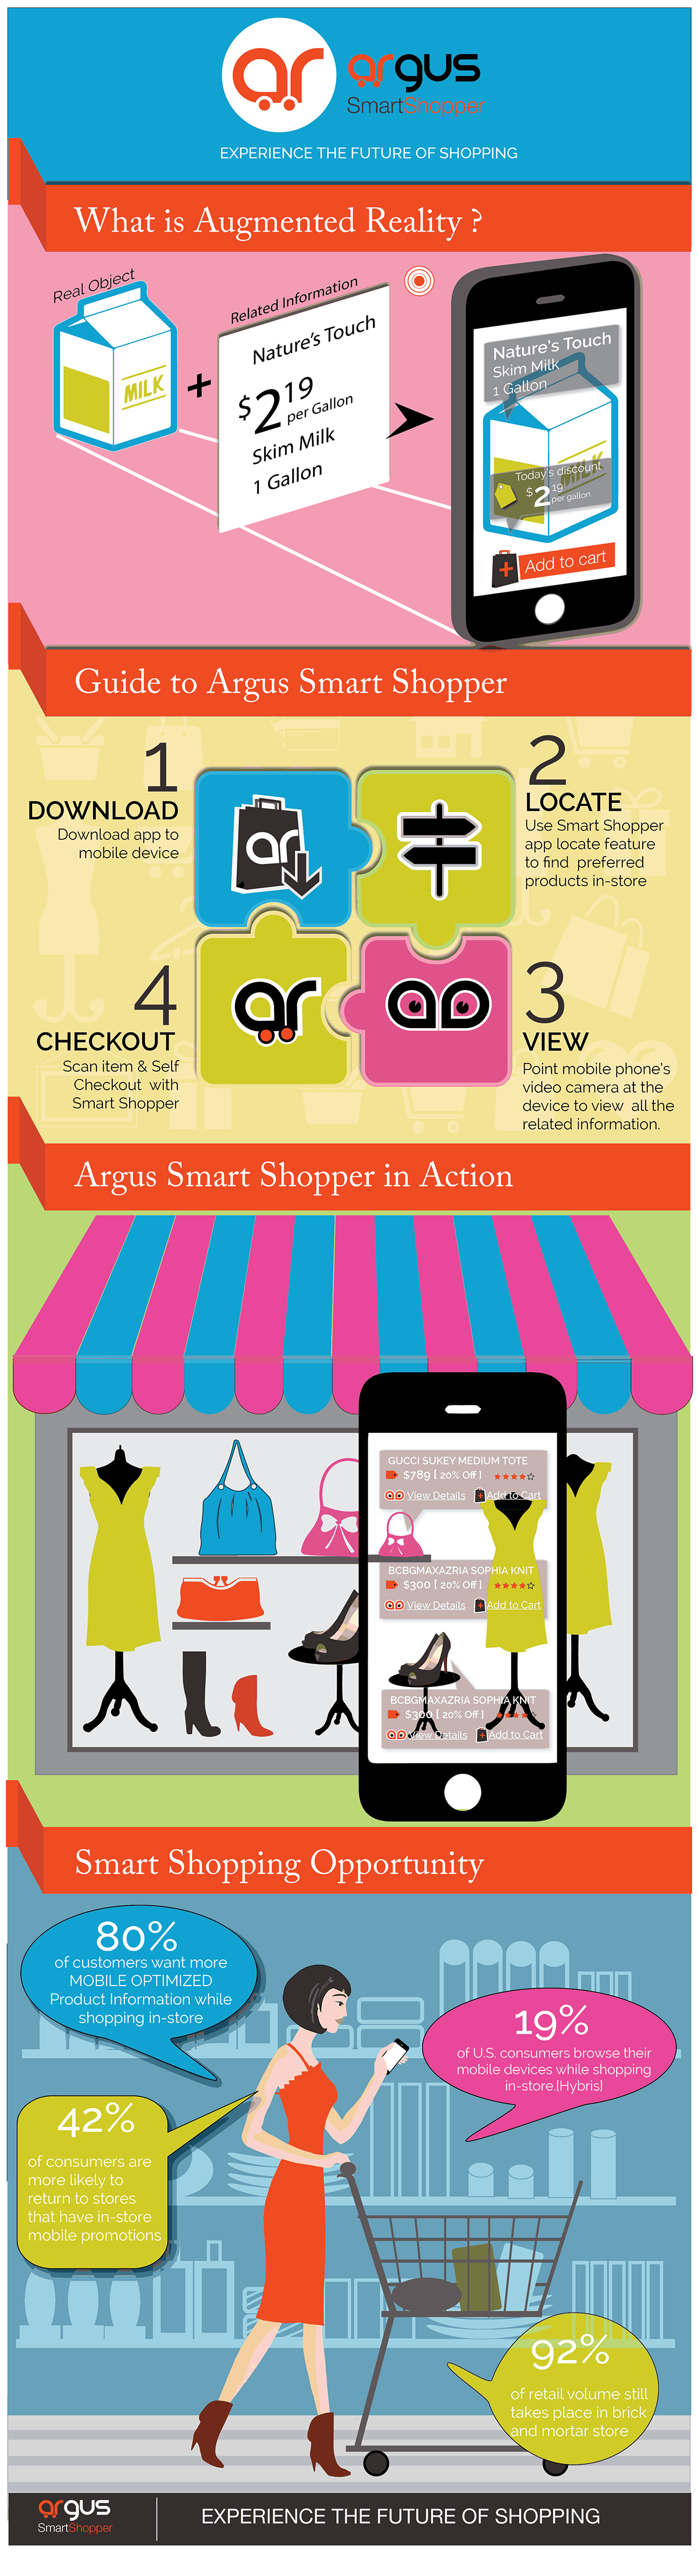 augmented reality Shopping mobile app Retail Experience Interface infographic Identity Design logo ios